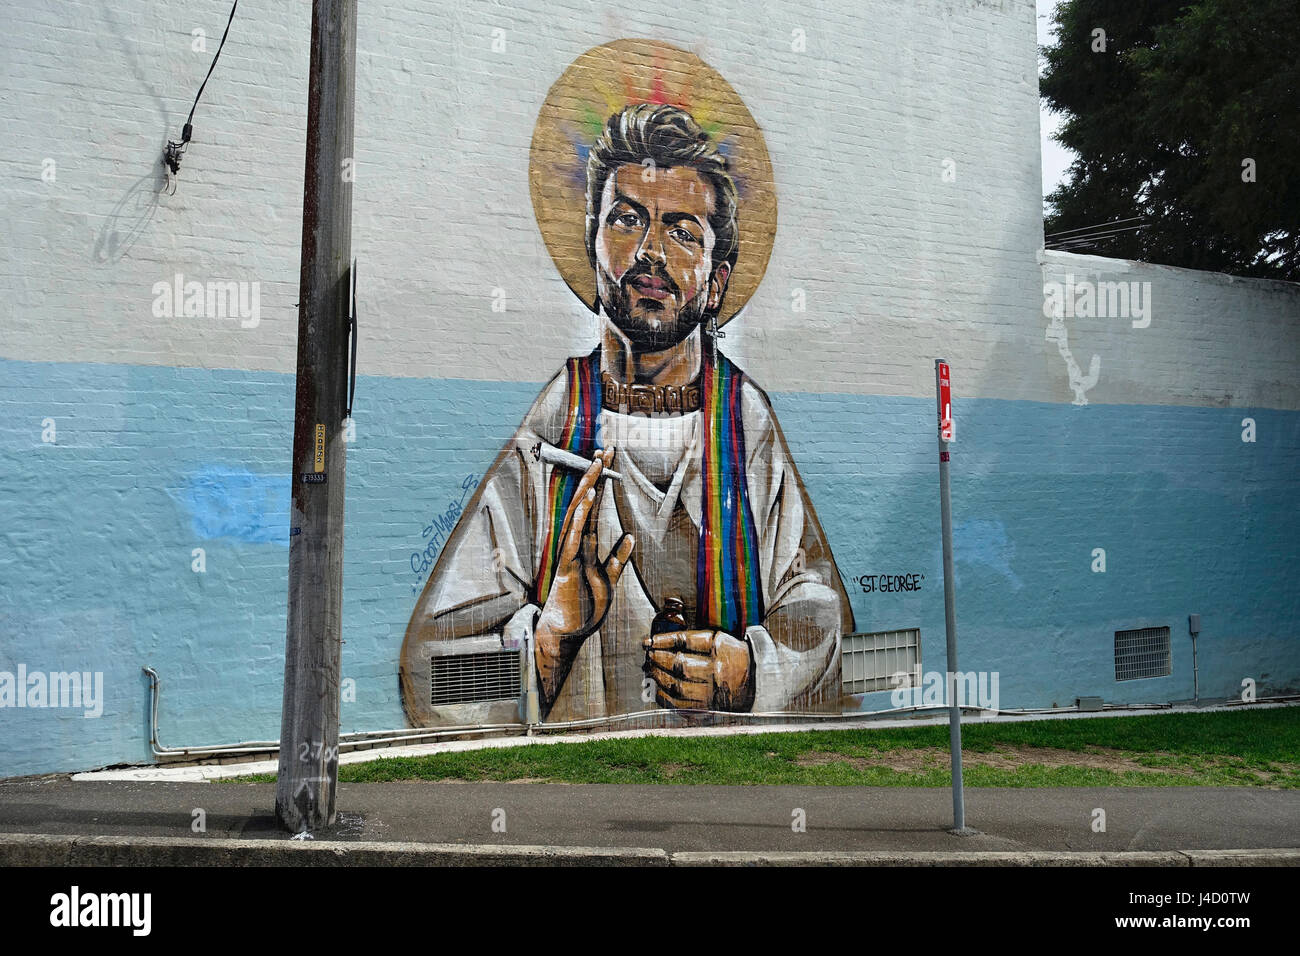 A mural painted in the inner-city suburb of Erskineville, Sydney, NSW, Australia in 2017 depicting the international singing star George Michael Stock Photo